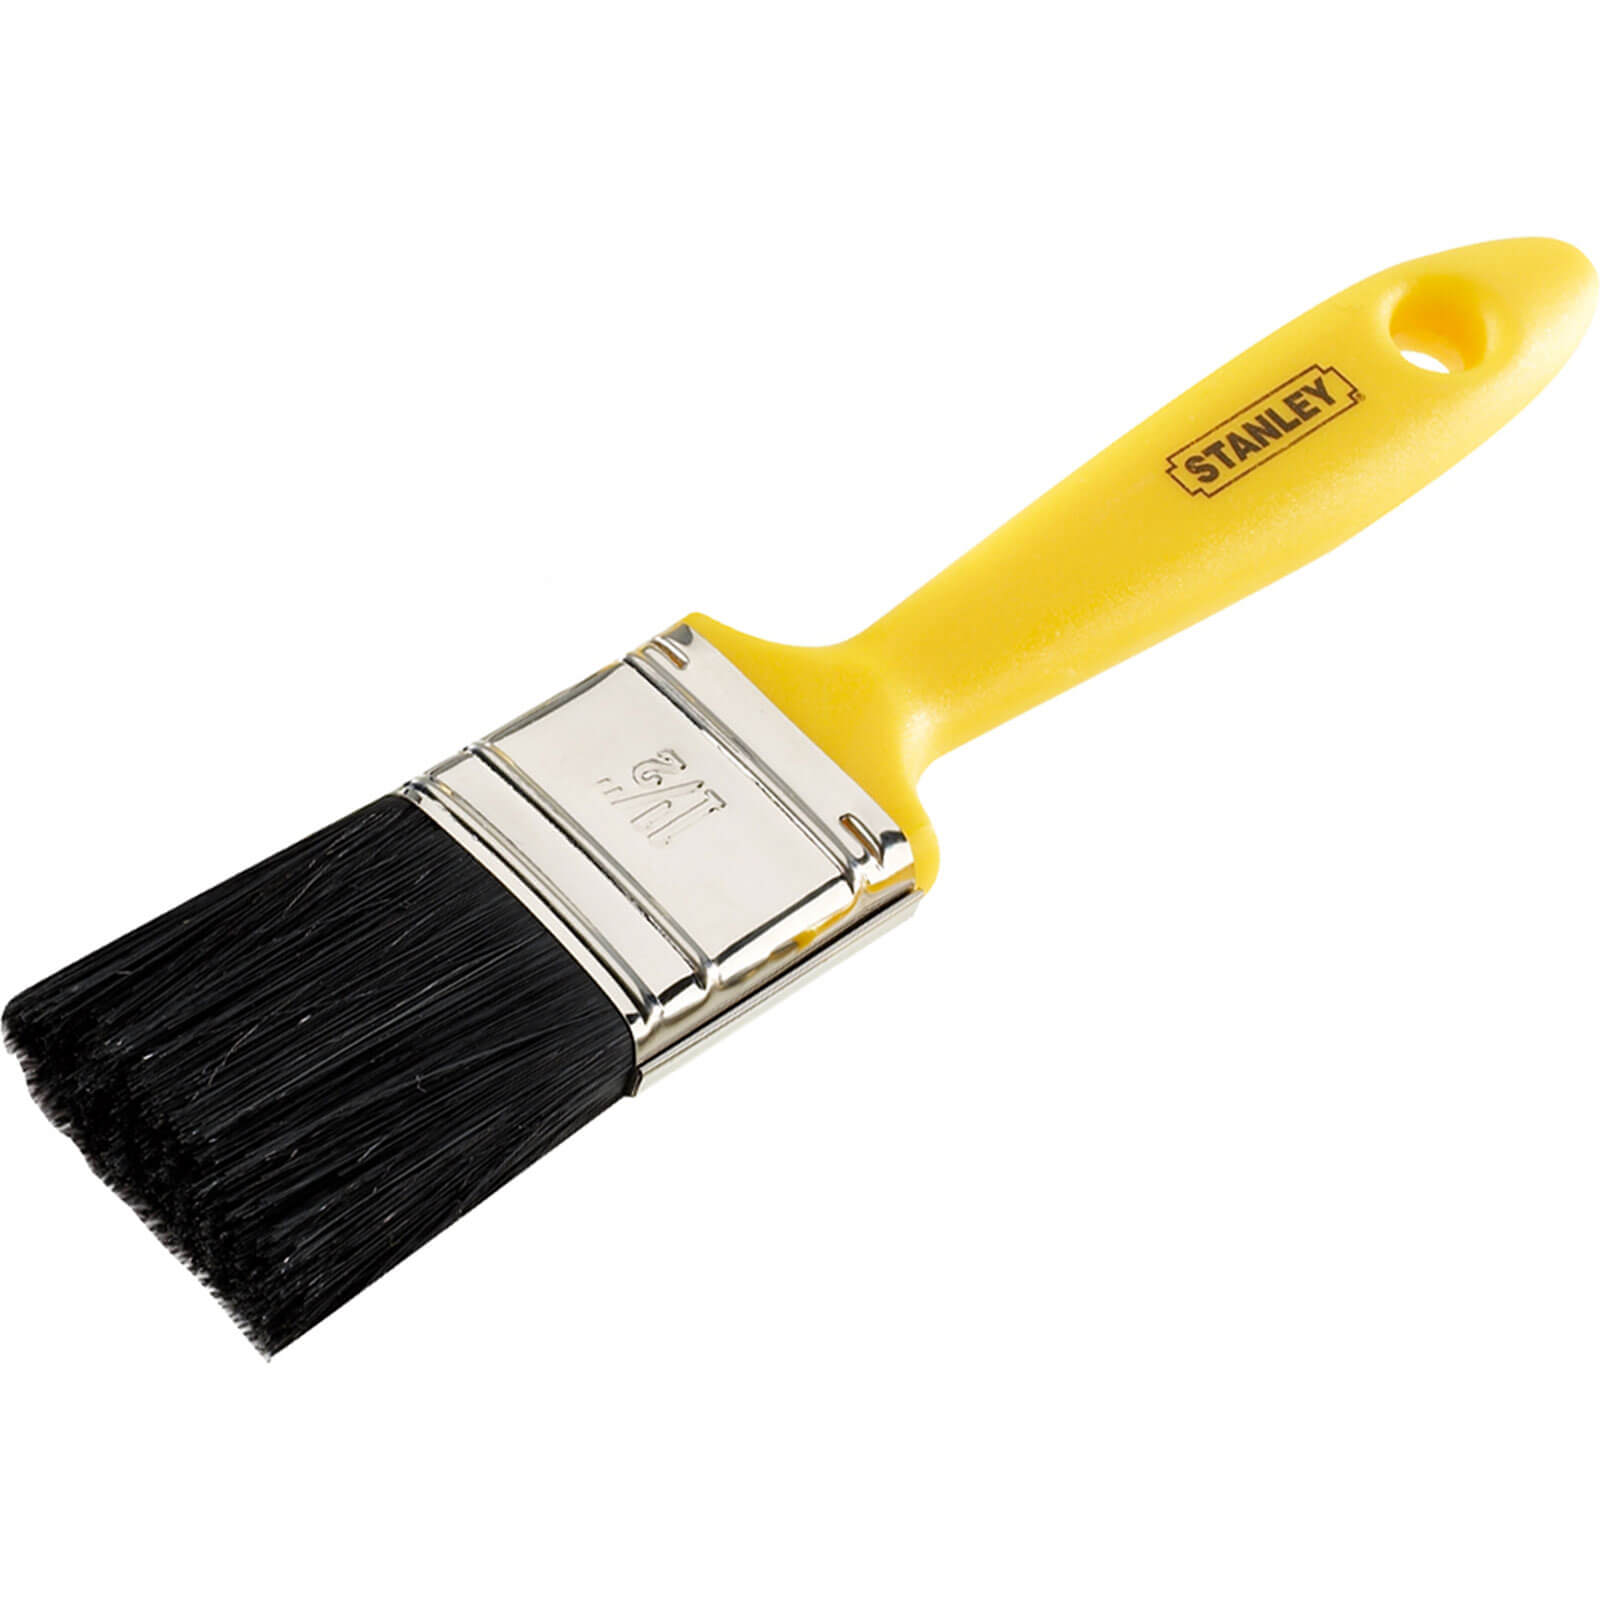 Photos - Putty Knife / Painting Tool Stanley Hobby Paint Brush 38mm 